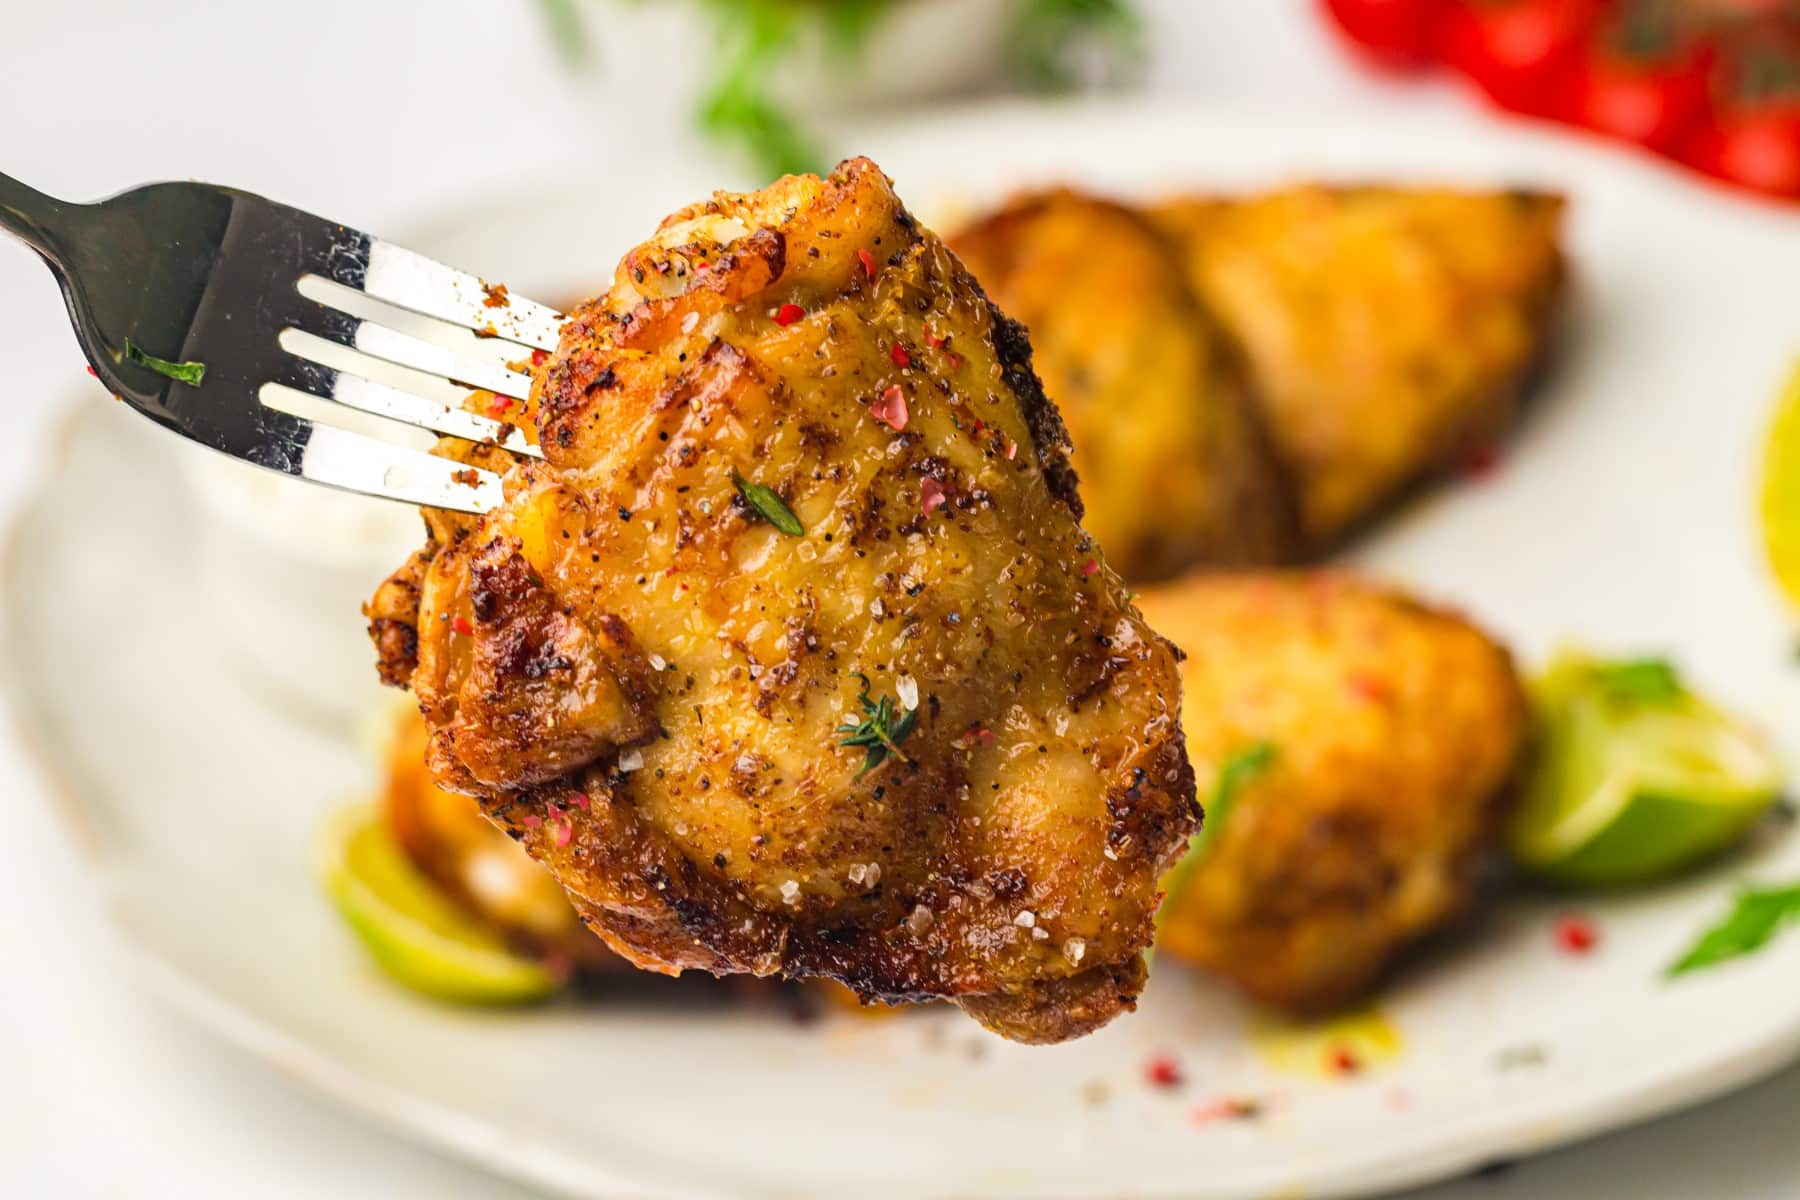 Horizontal shot of cooked air fryer chicken thigh on a fork.